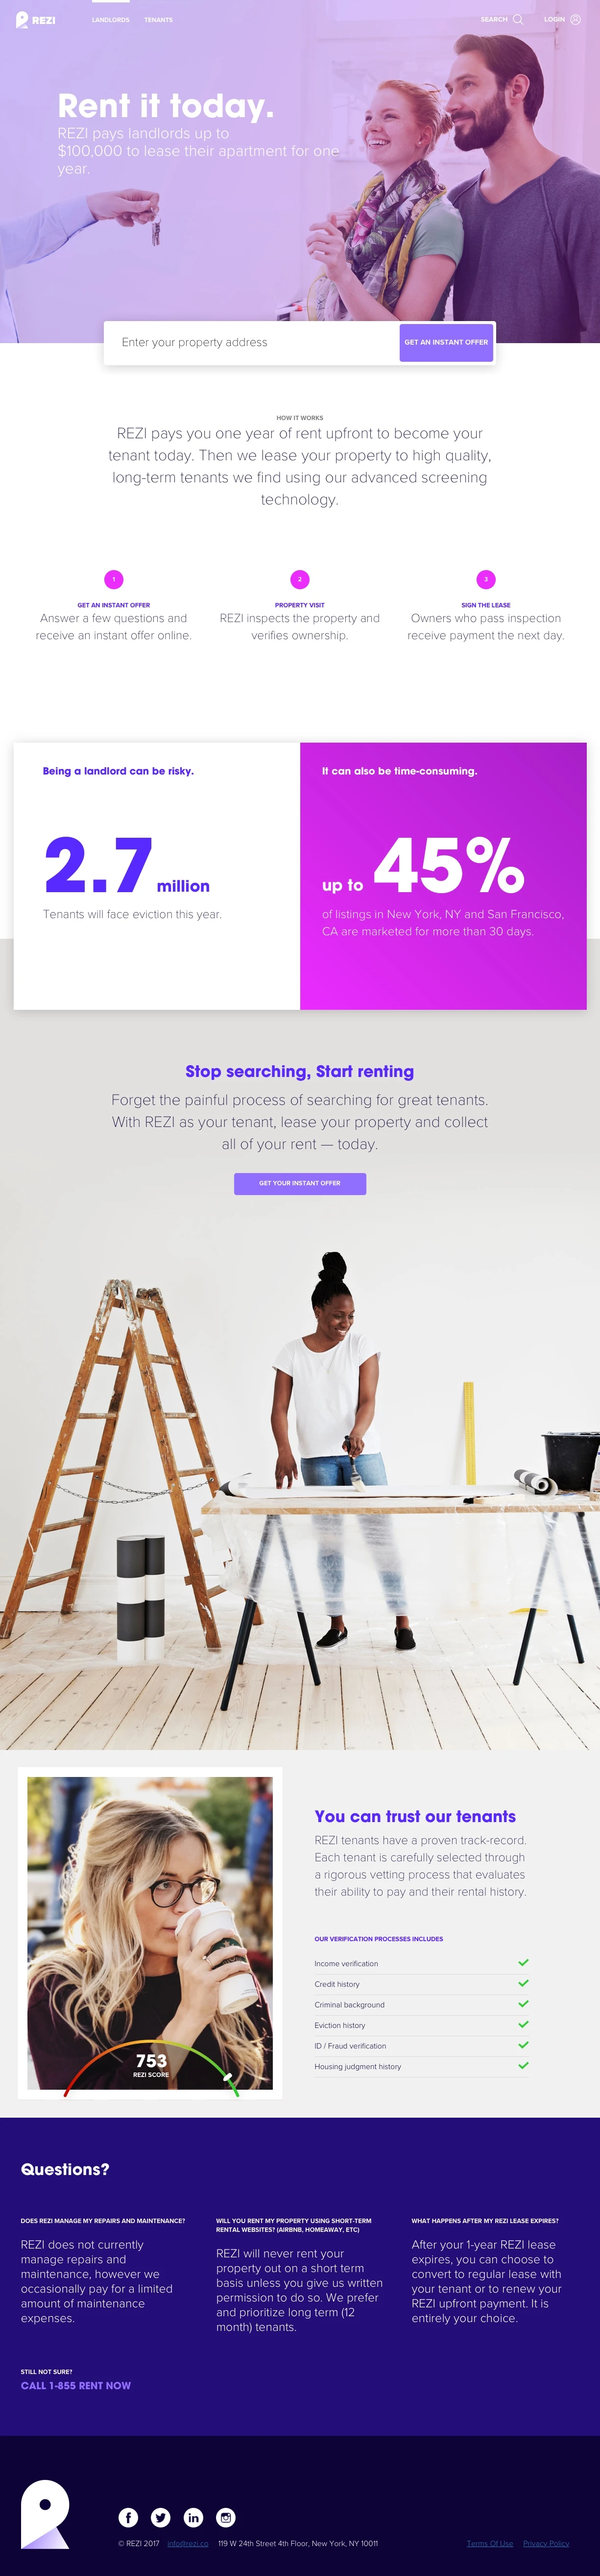 Rezi Landing Page Example: With REZI as your tenant, lease your property and collect all of your rent — today